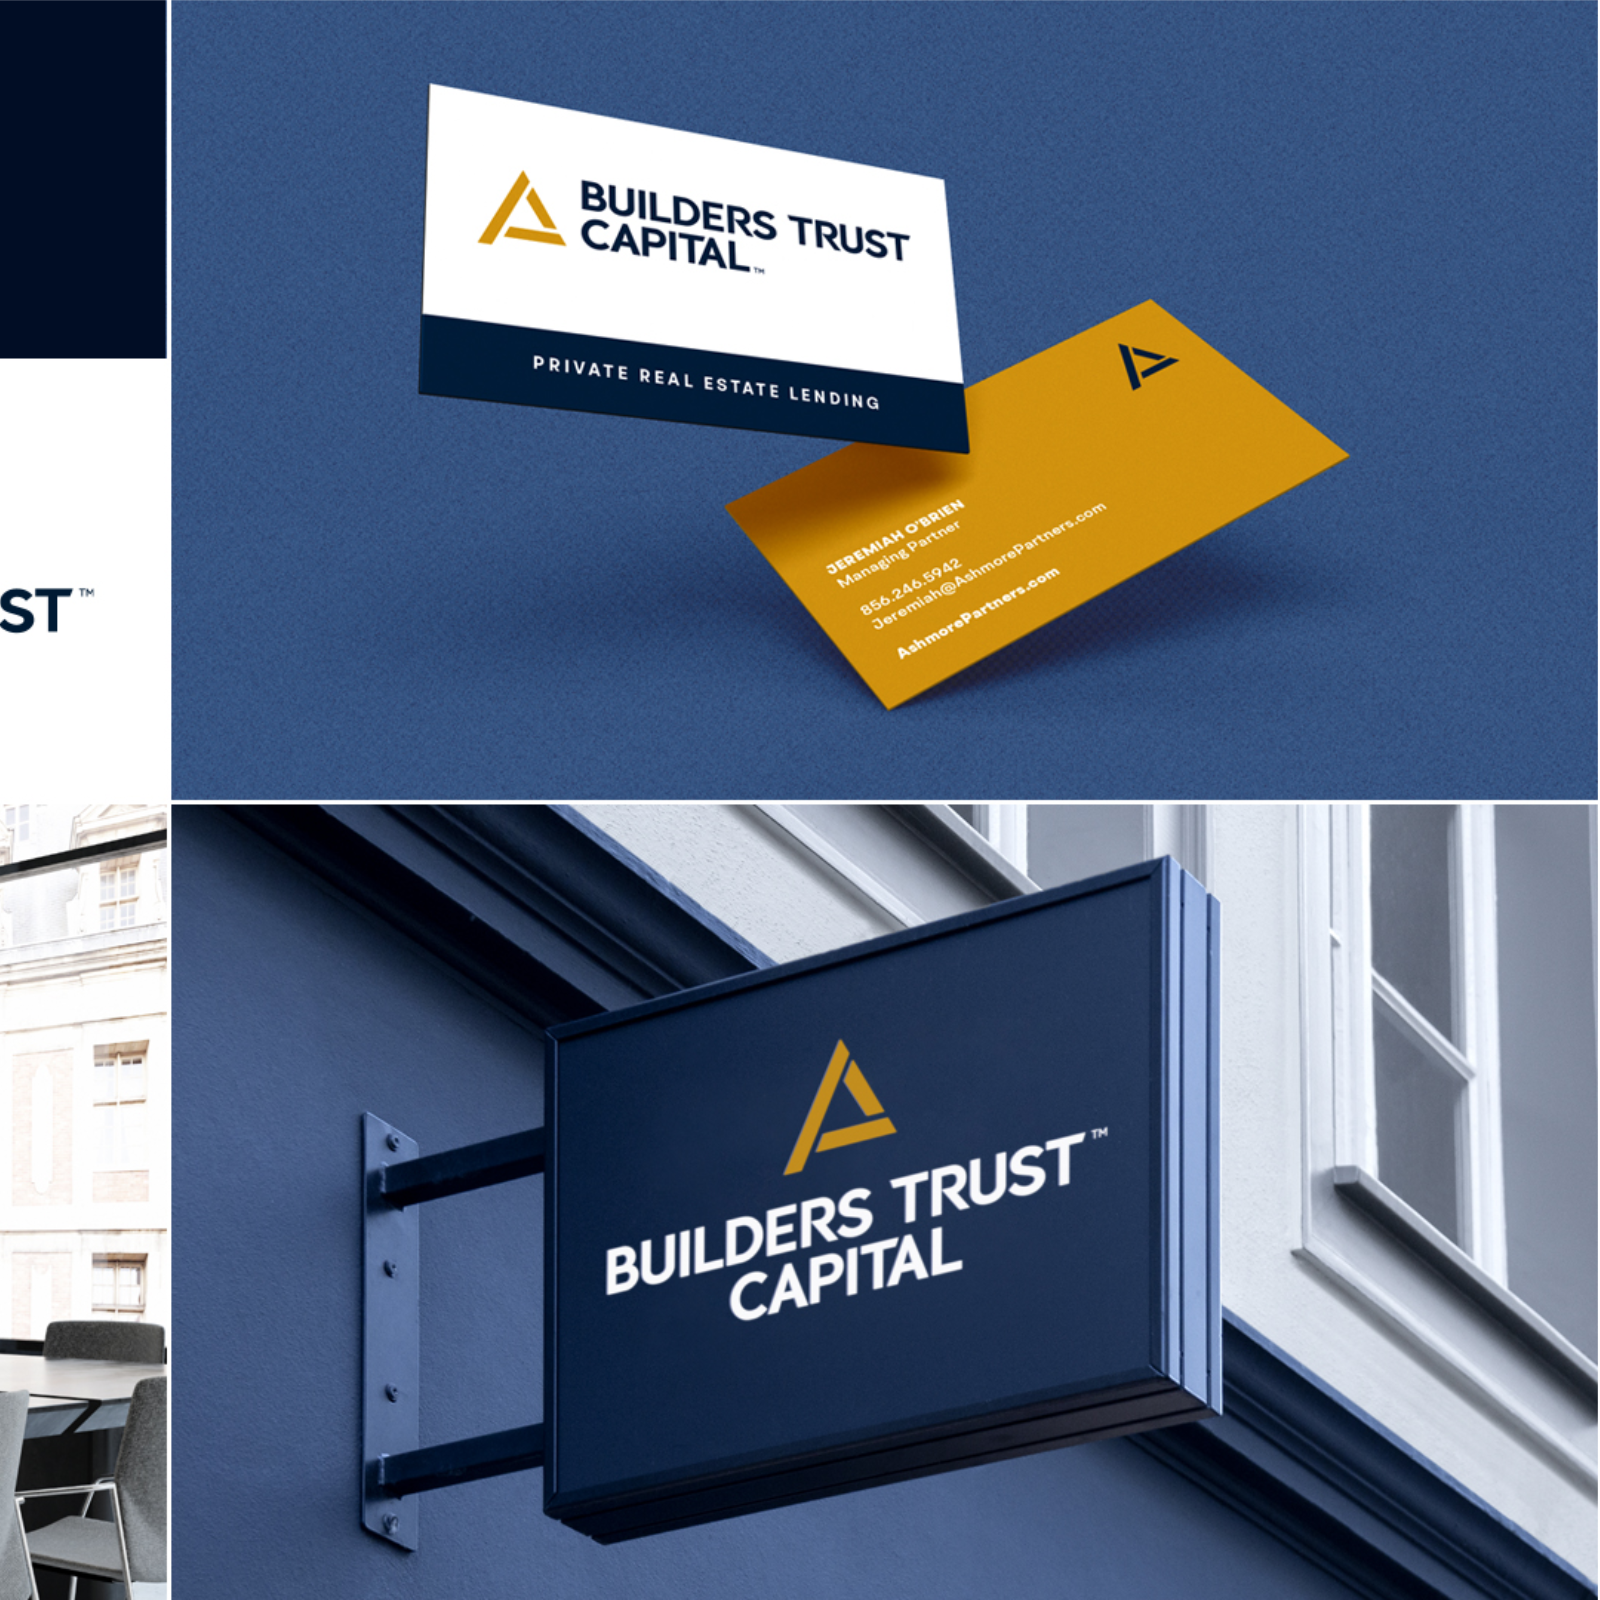 Screenshot of the presentation for the new Builders Trust Capital logo in context on a sign and business cards